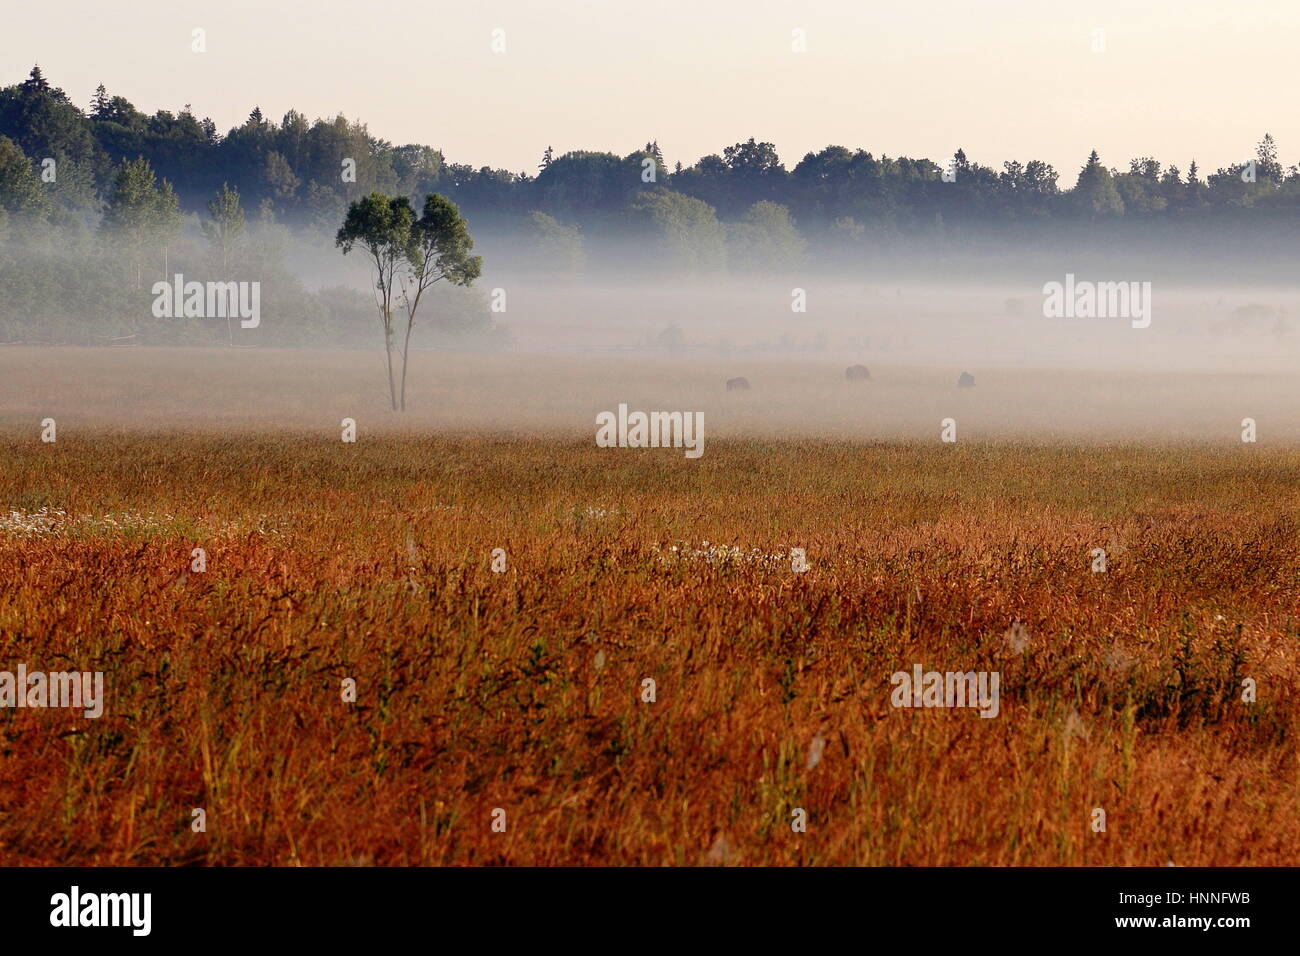 Foggy Sunrise over Grassy Meadow in Bialowieza National Park Stock Photo